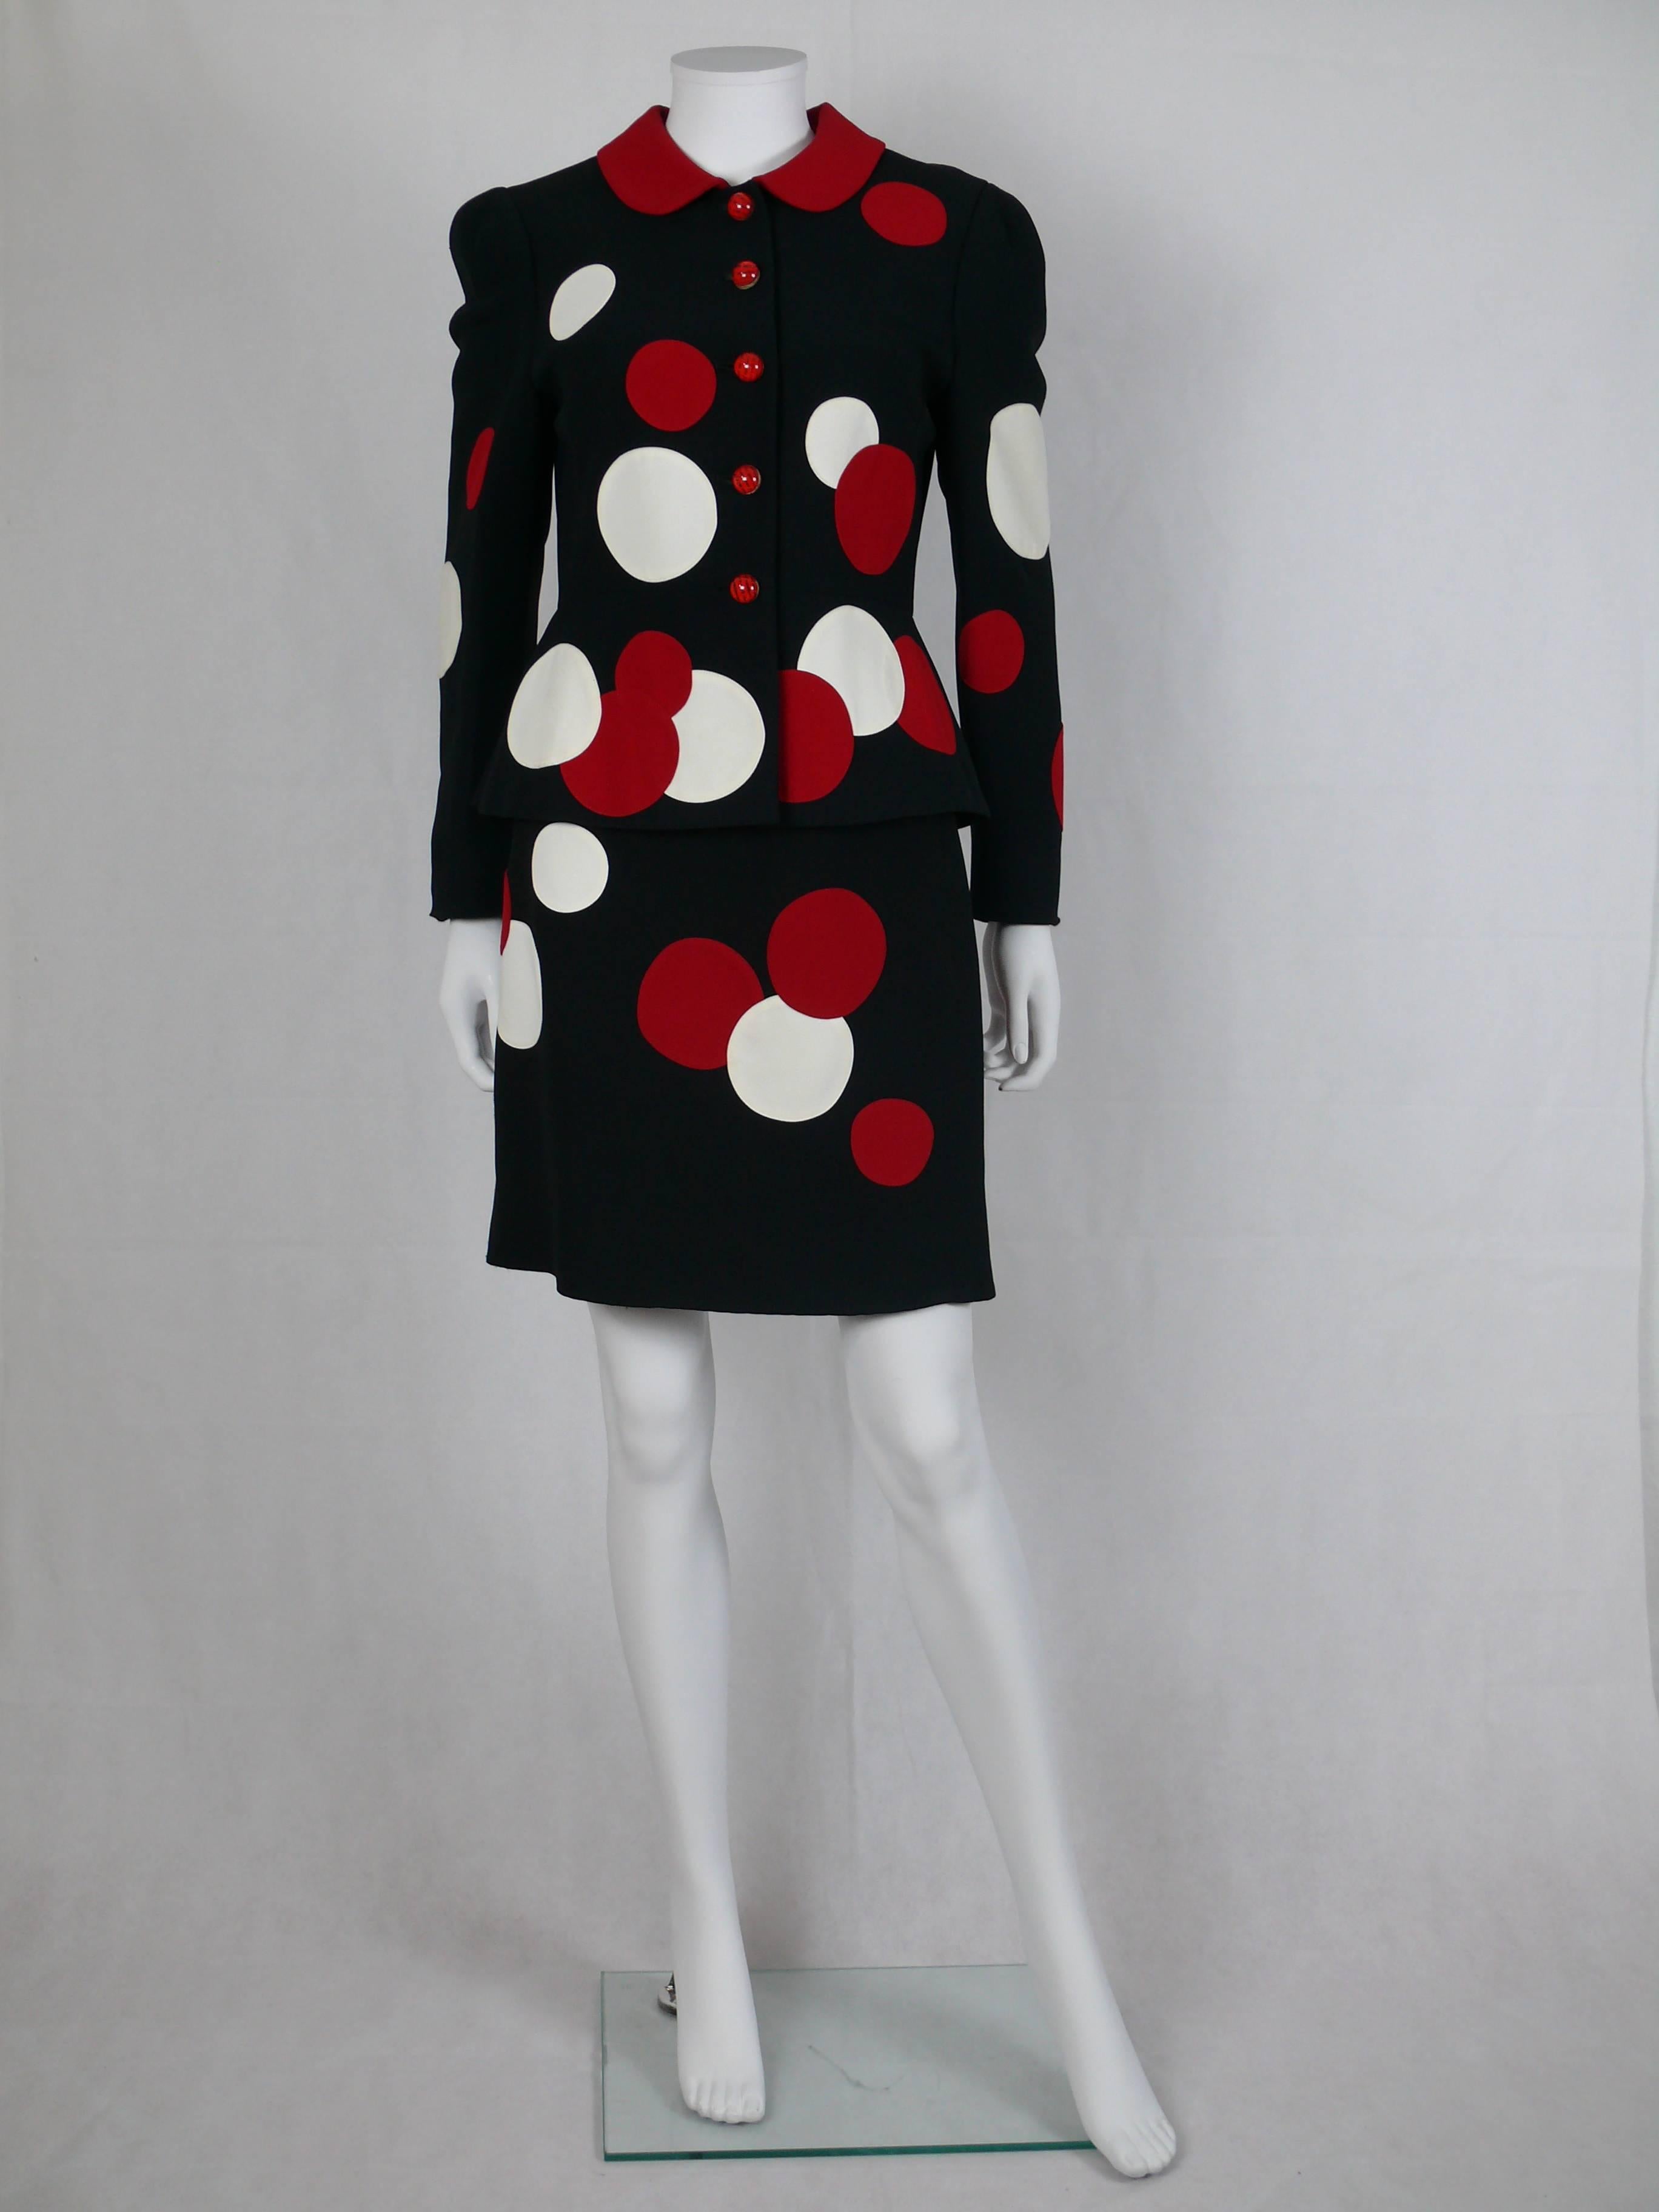 MOSCHINO vintage black, red and white polka dot skirt suit.

Blazer features a Peter Pan collar, front button fastening and long sleeves.
Fitted.

Matching skirt is fitted and has a concealed zip fastening.

Both blazer and skirt are fully